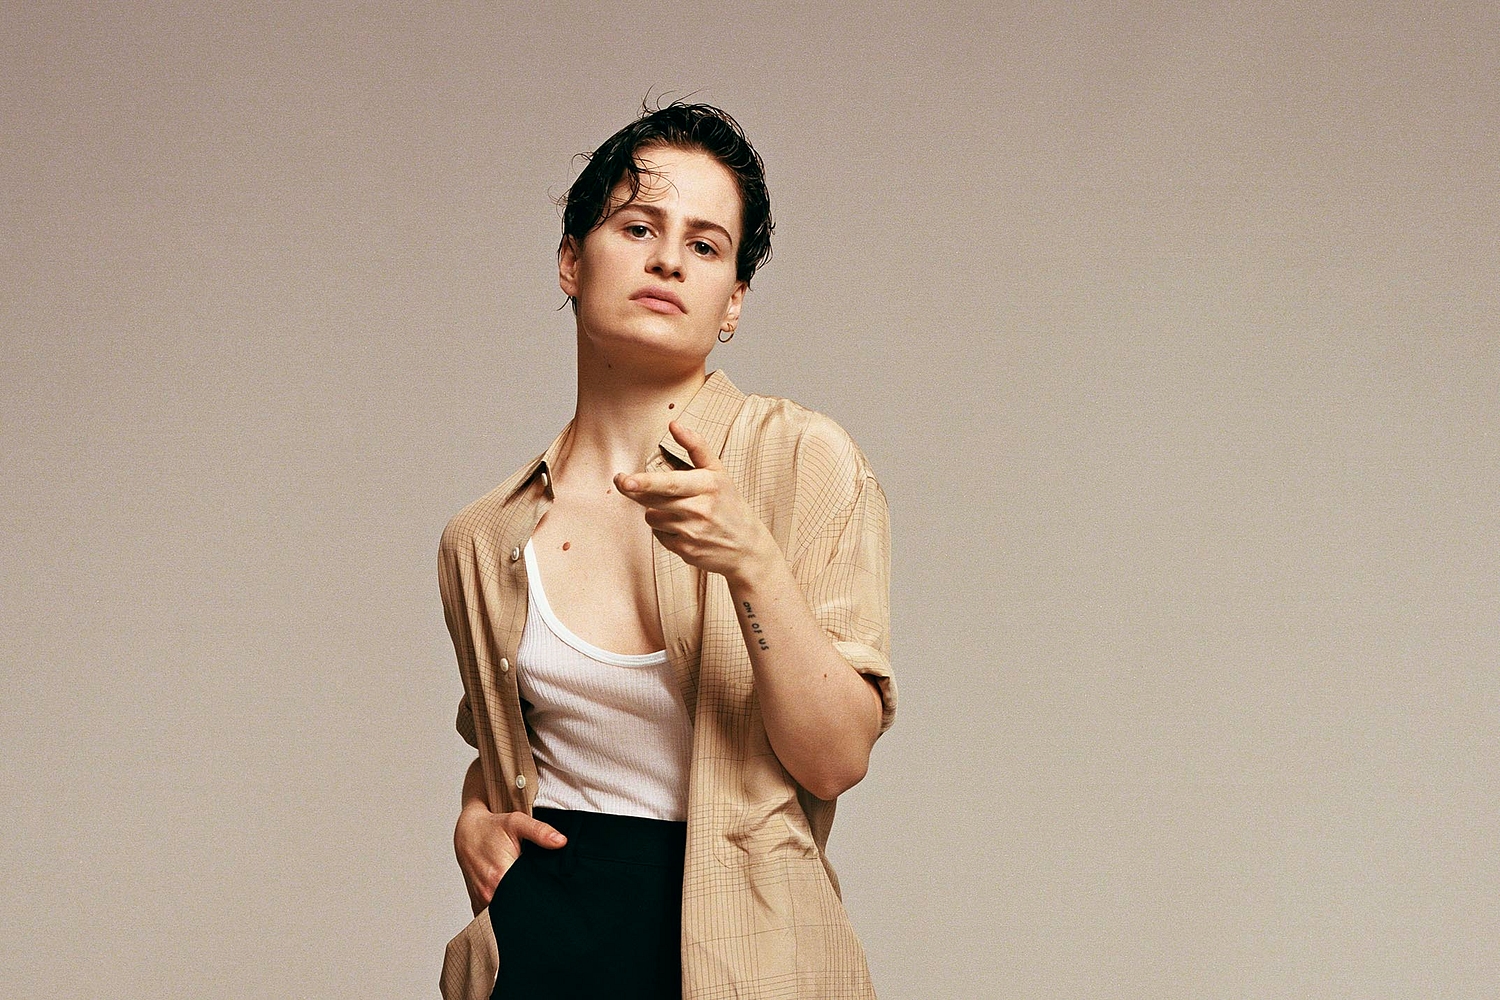 Christine and The Queens returns with four shows